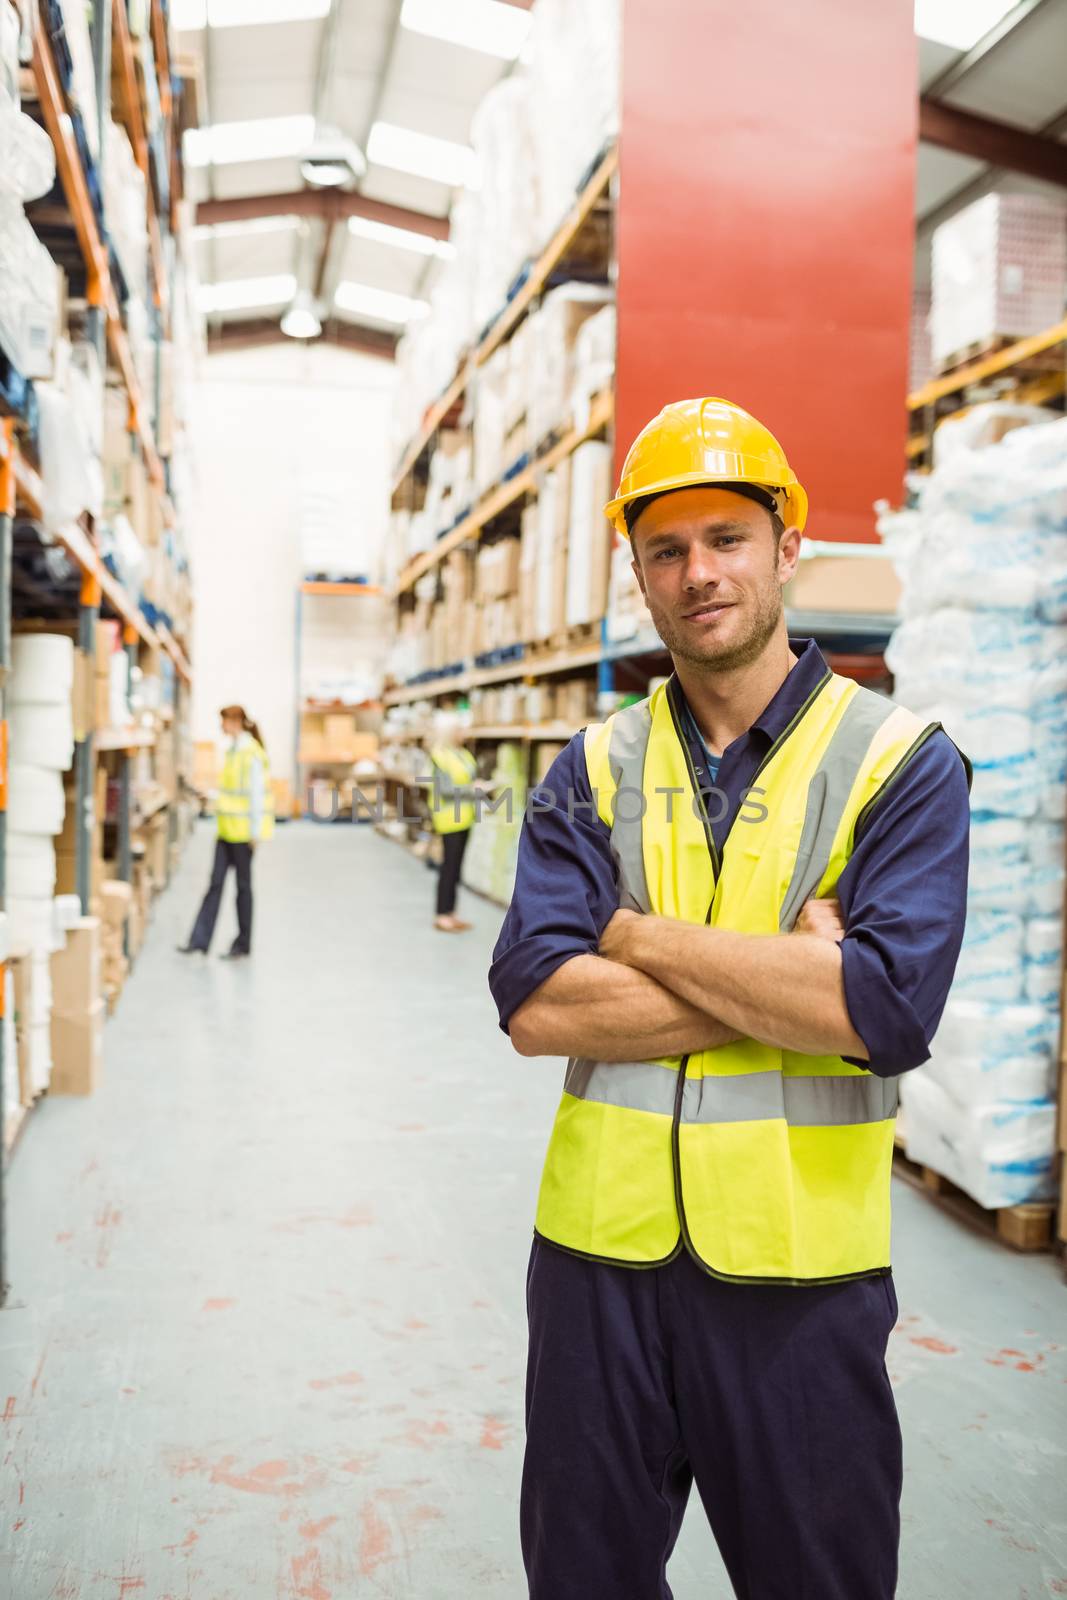 Warehouse worker smiling at camera with arms crossed in a large warehouse